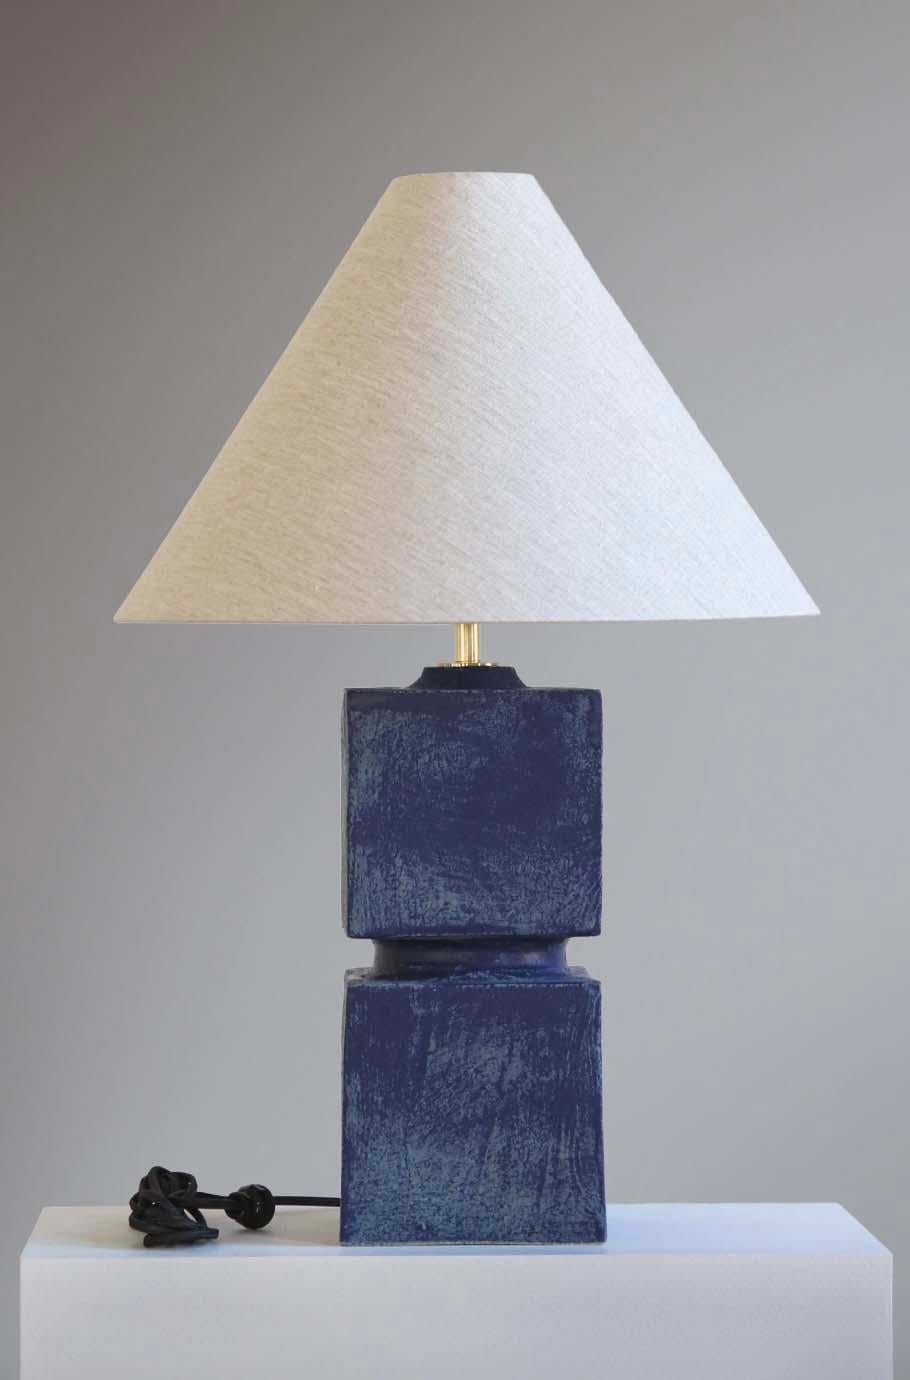 The Talis lamp is handmade studio pottery by ceramic artist by Danny Kaplan. Shade included. Please note exact dimensions may vary.

Born in New York City and raised in Aix-en-Provence, France, Danny Kaplan’s passion for ceramics was shaped by